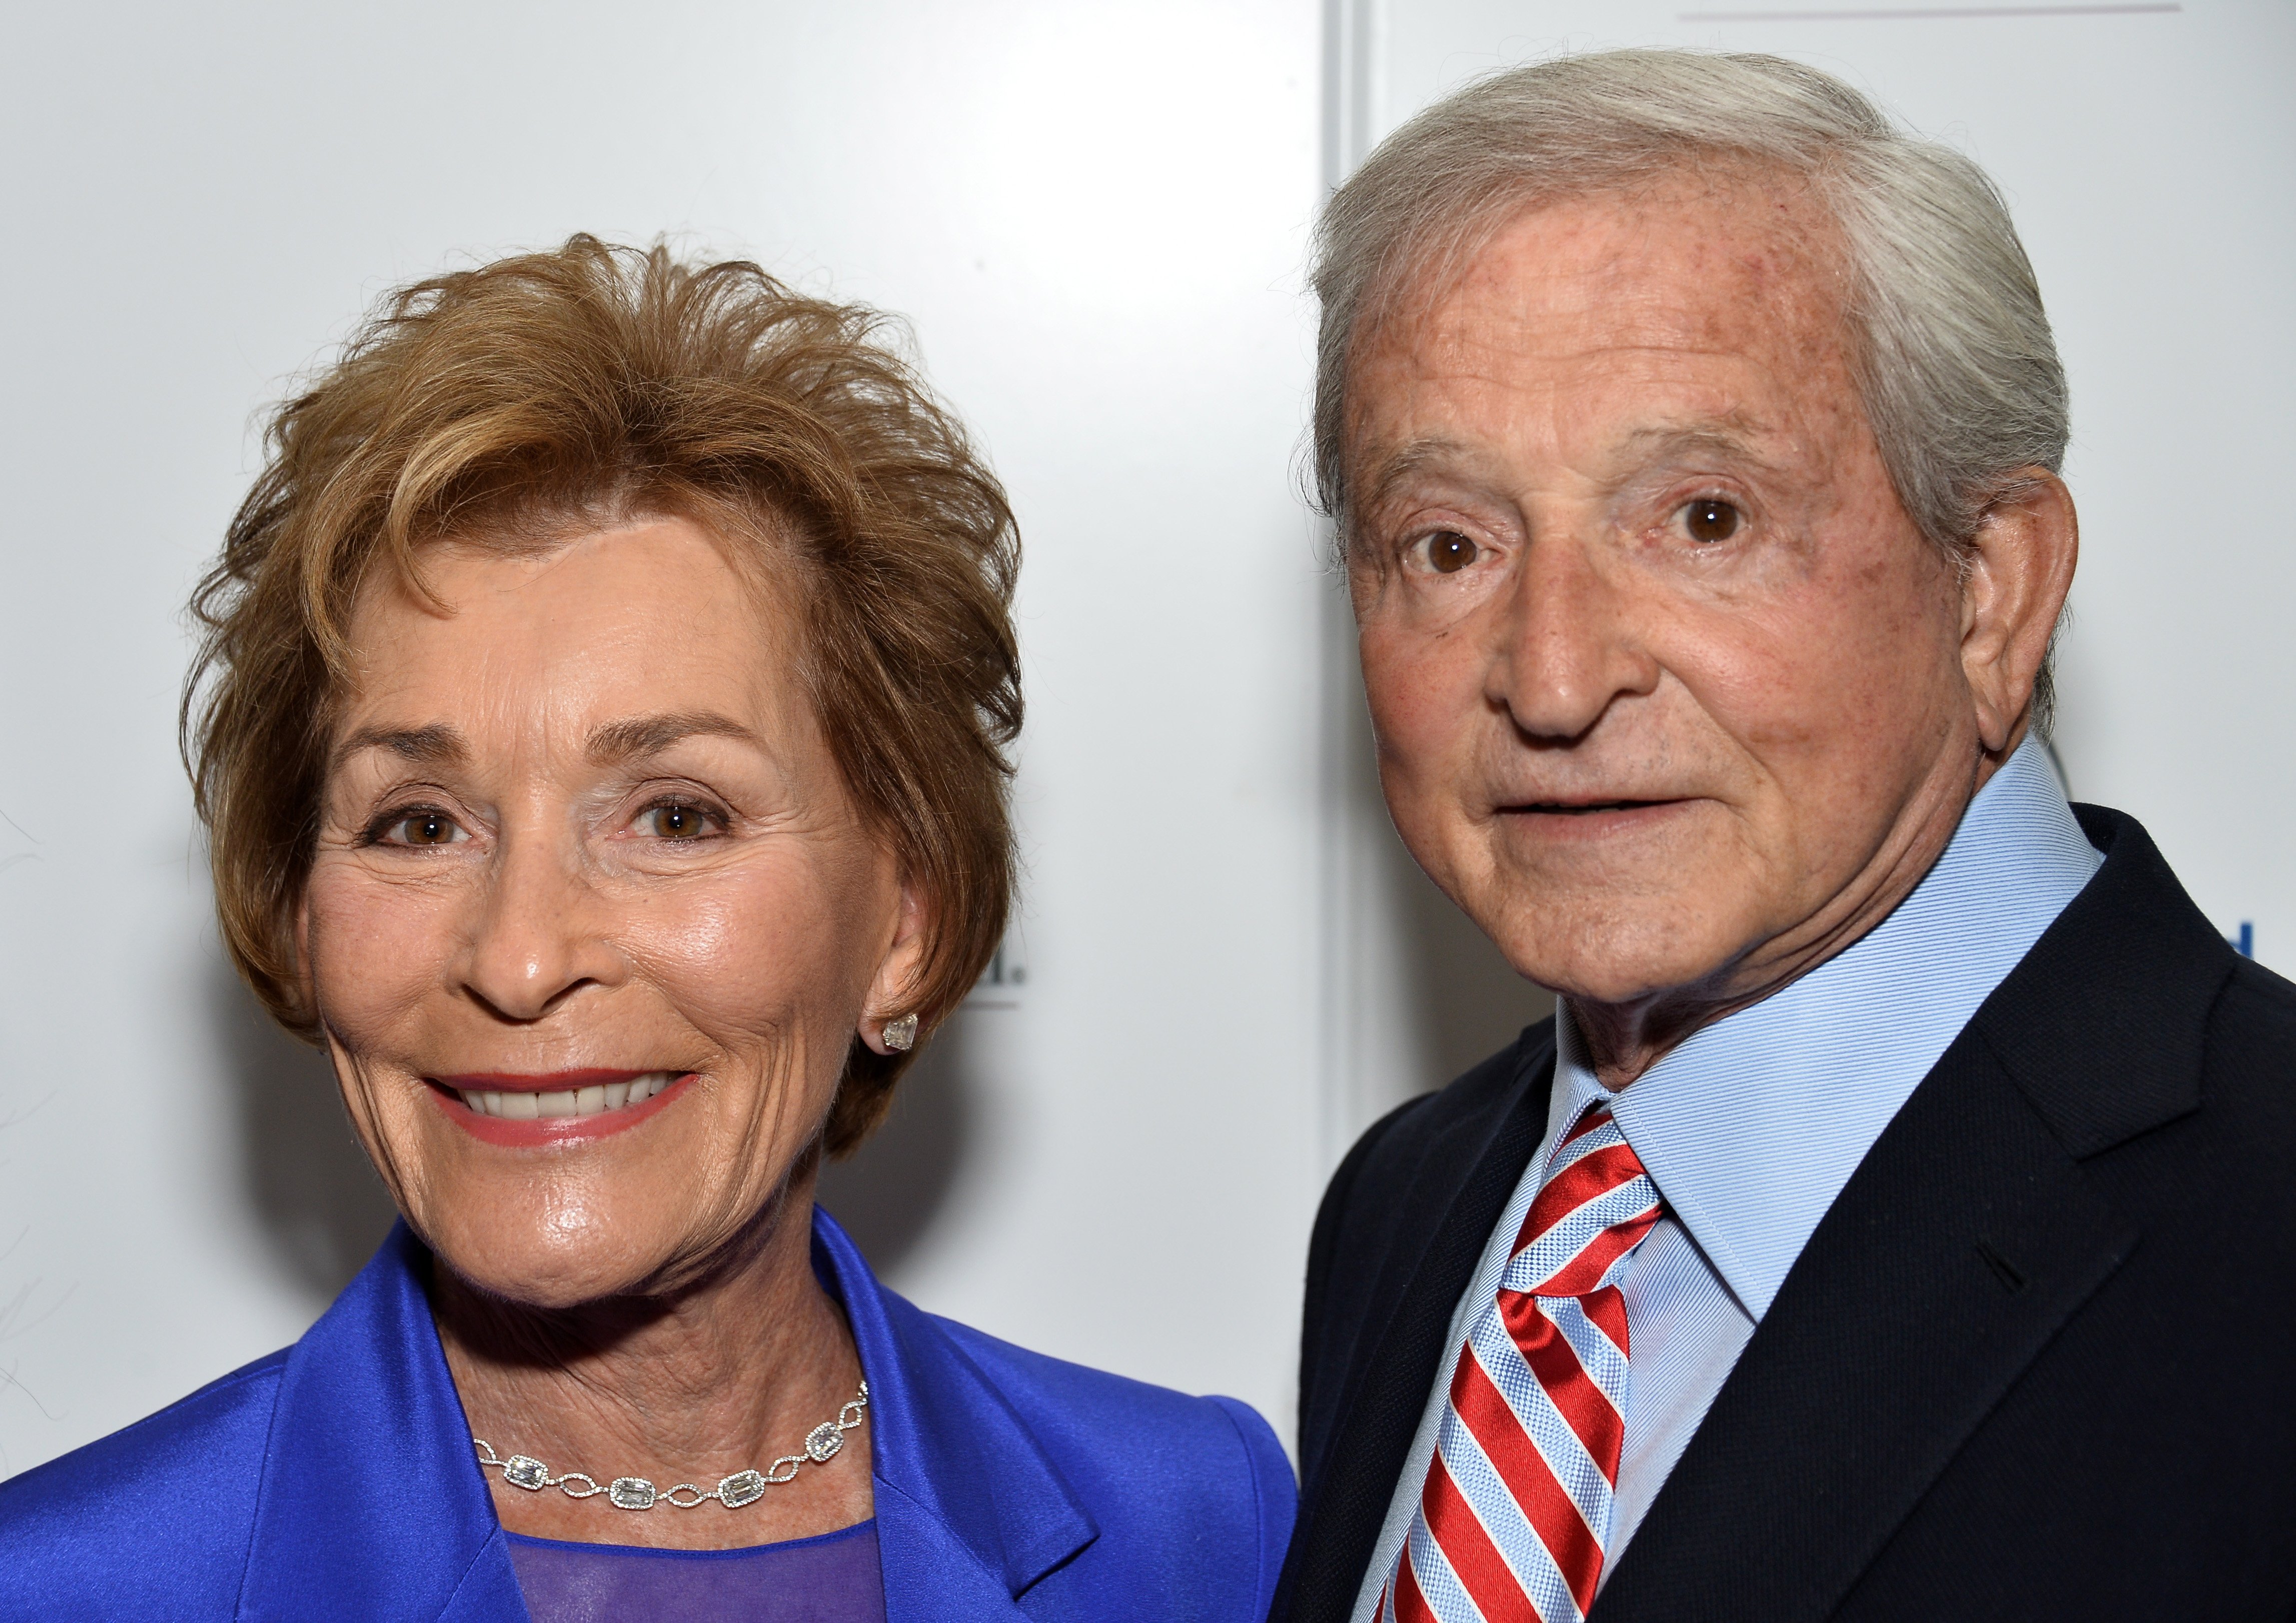 Judy Sheindlin and her husband Jerry Sheindlin arrive at the Women's Guild Cedars-Sinai's Annual Luncheon at the Regent Beverly Wilshire Hotel on April 13, 2015 in Beverly Hills, California. | Source: Getty Images